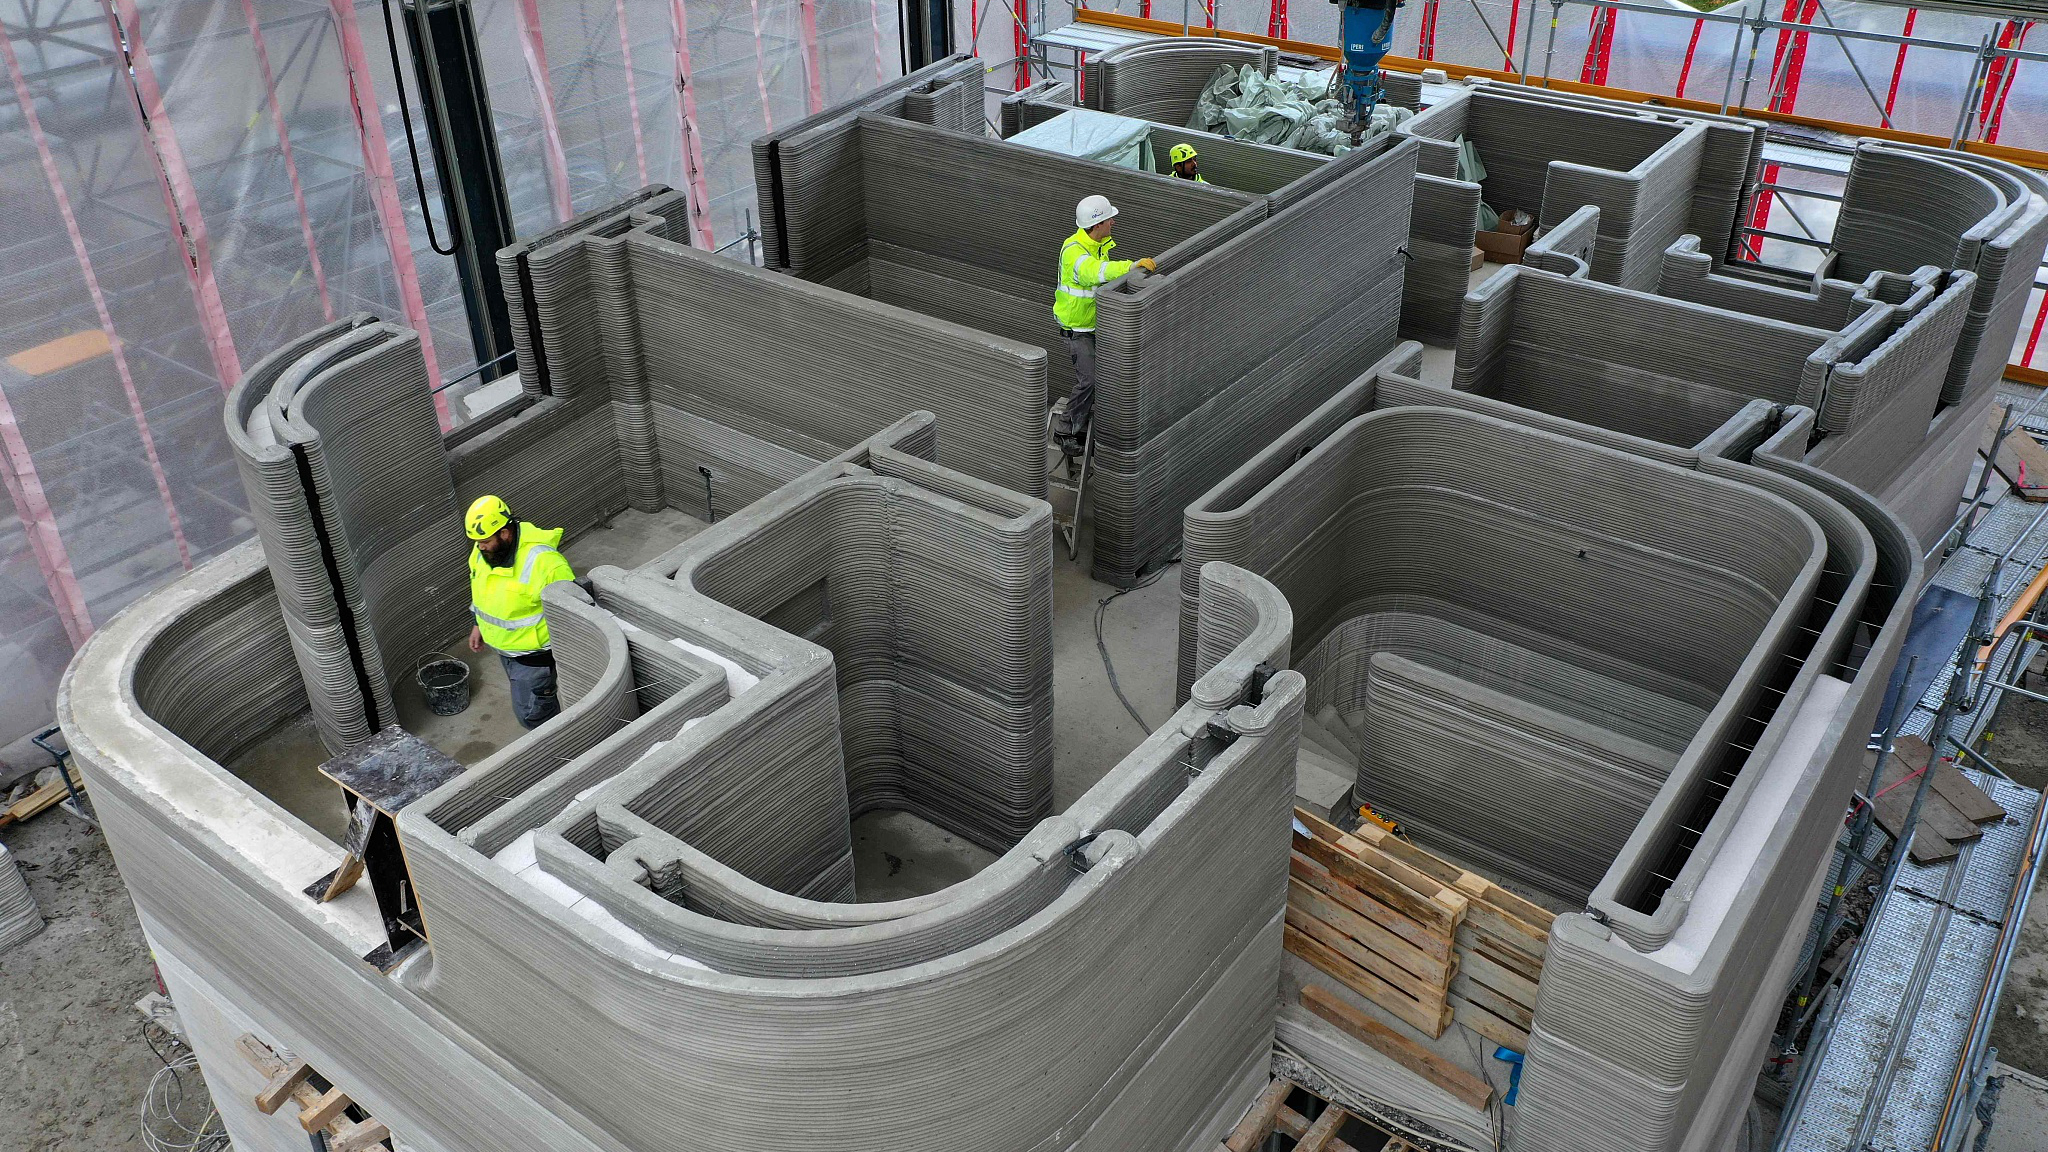 Future cities could be 3D printed – using concrete made with recycled glass